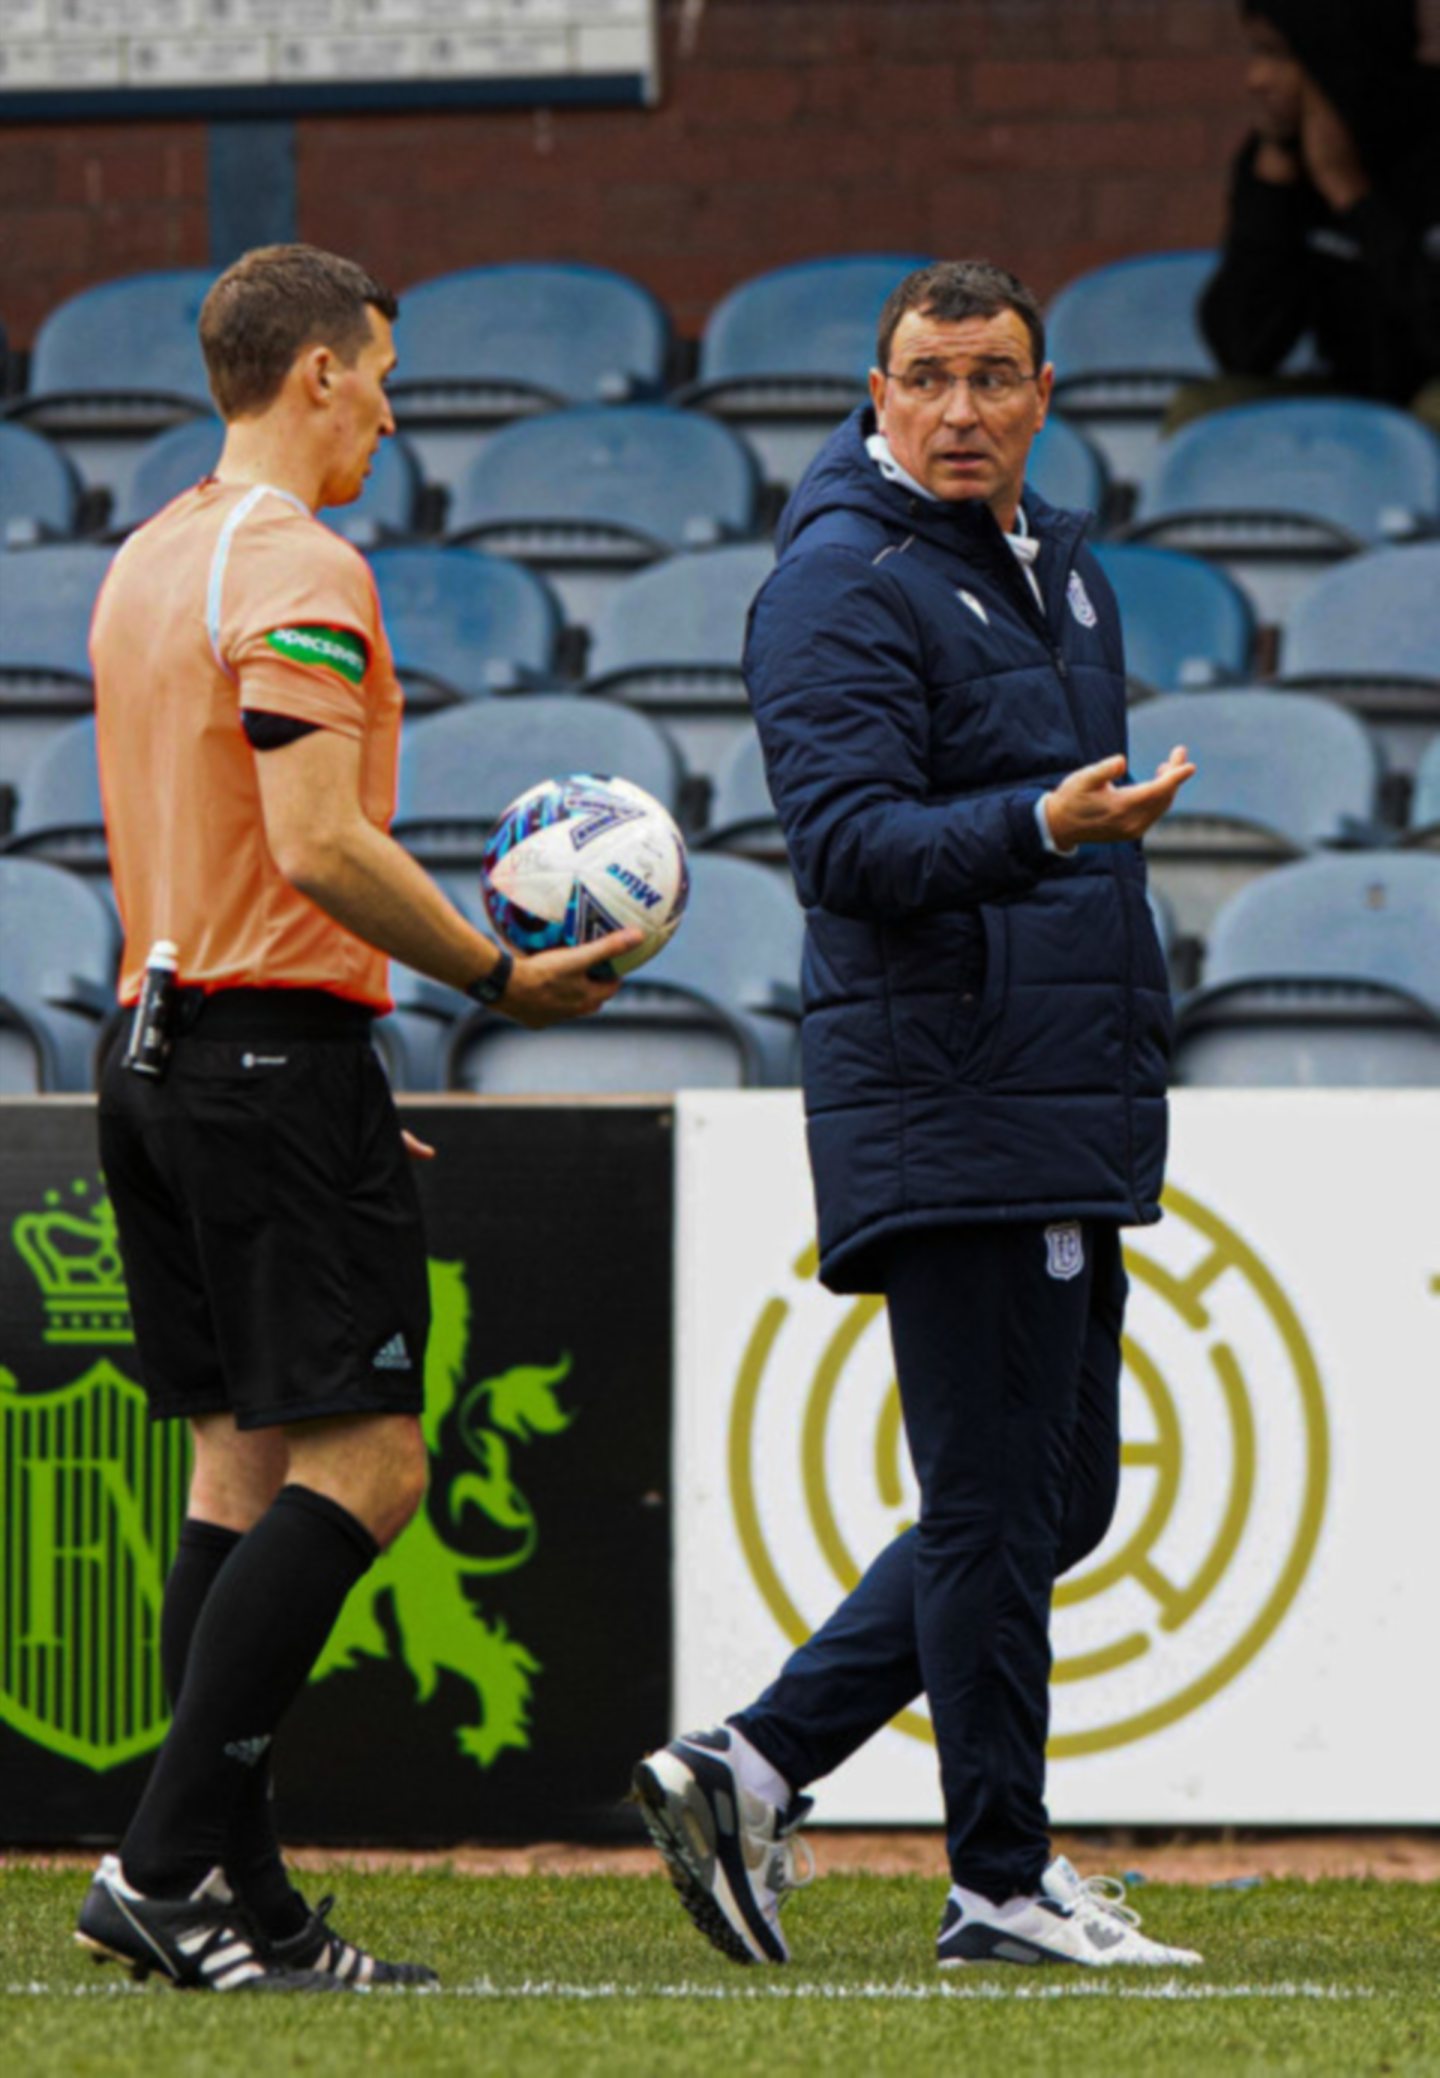 Dundee manager Gary Bowyer has words with the referee.